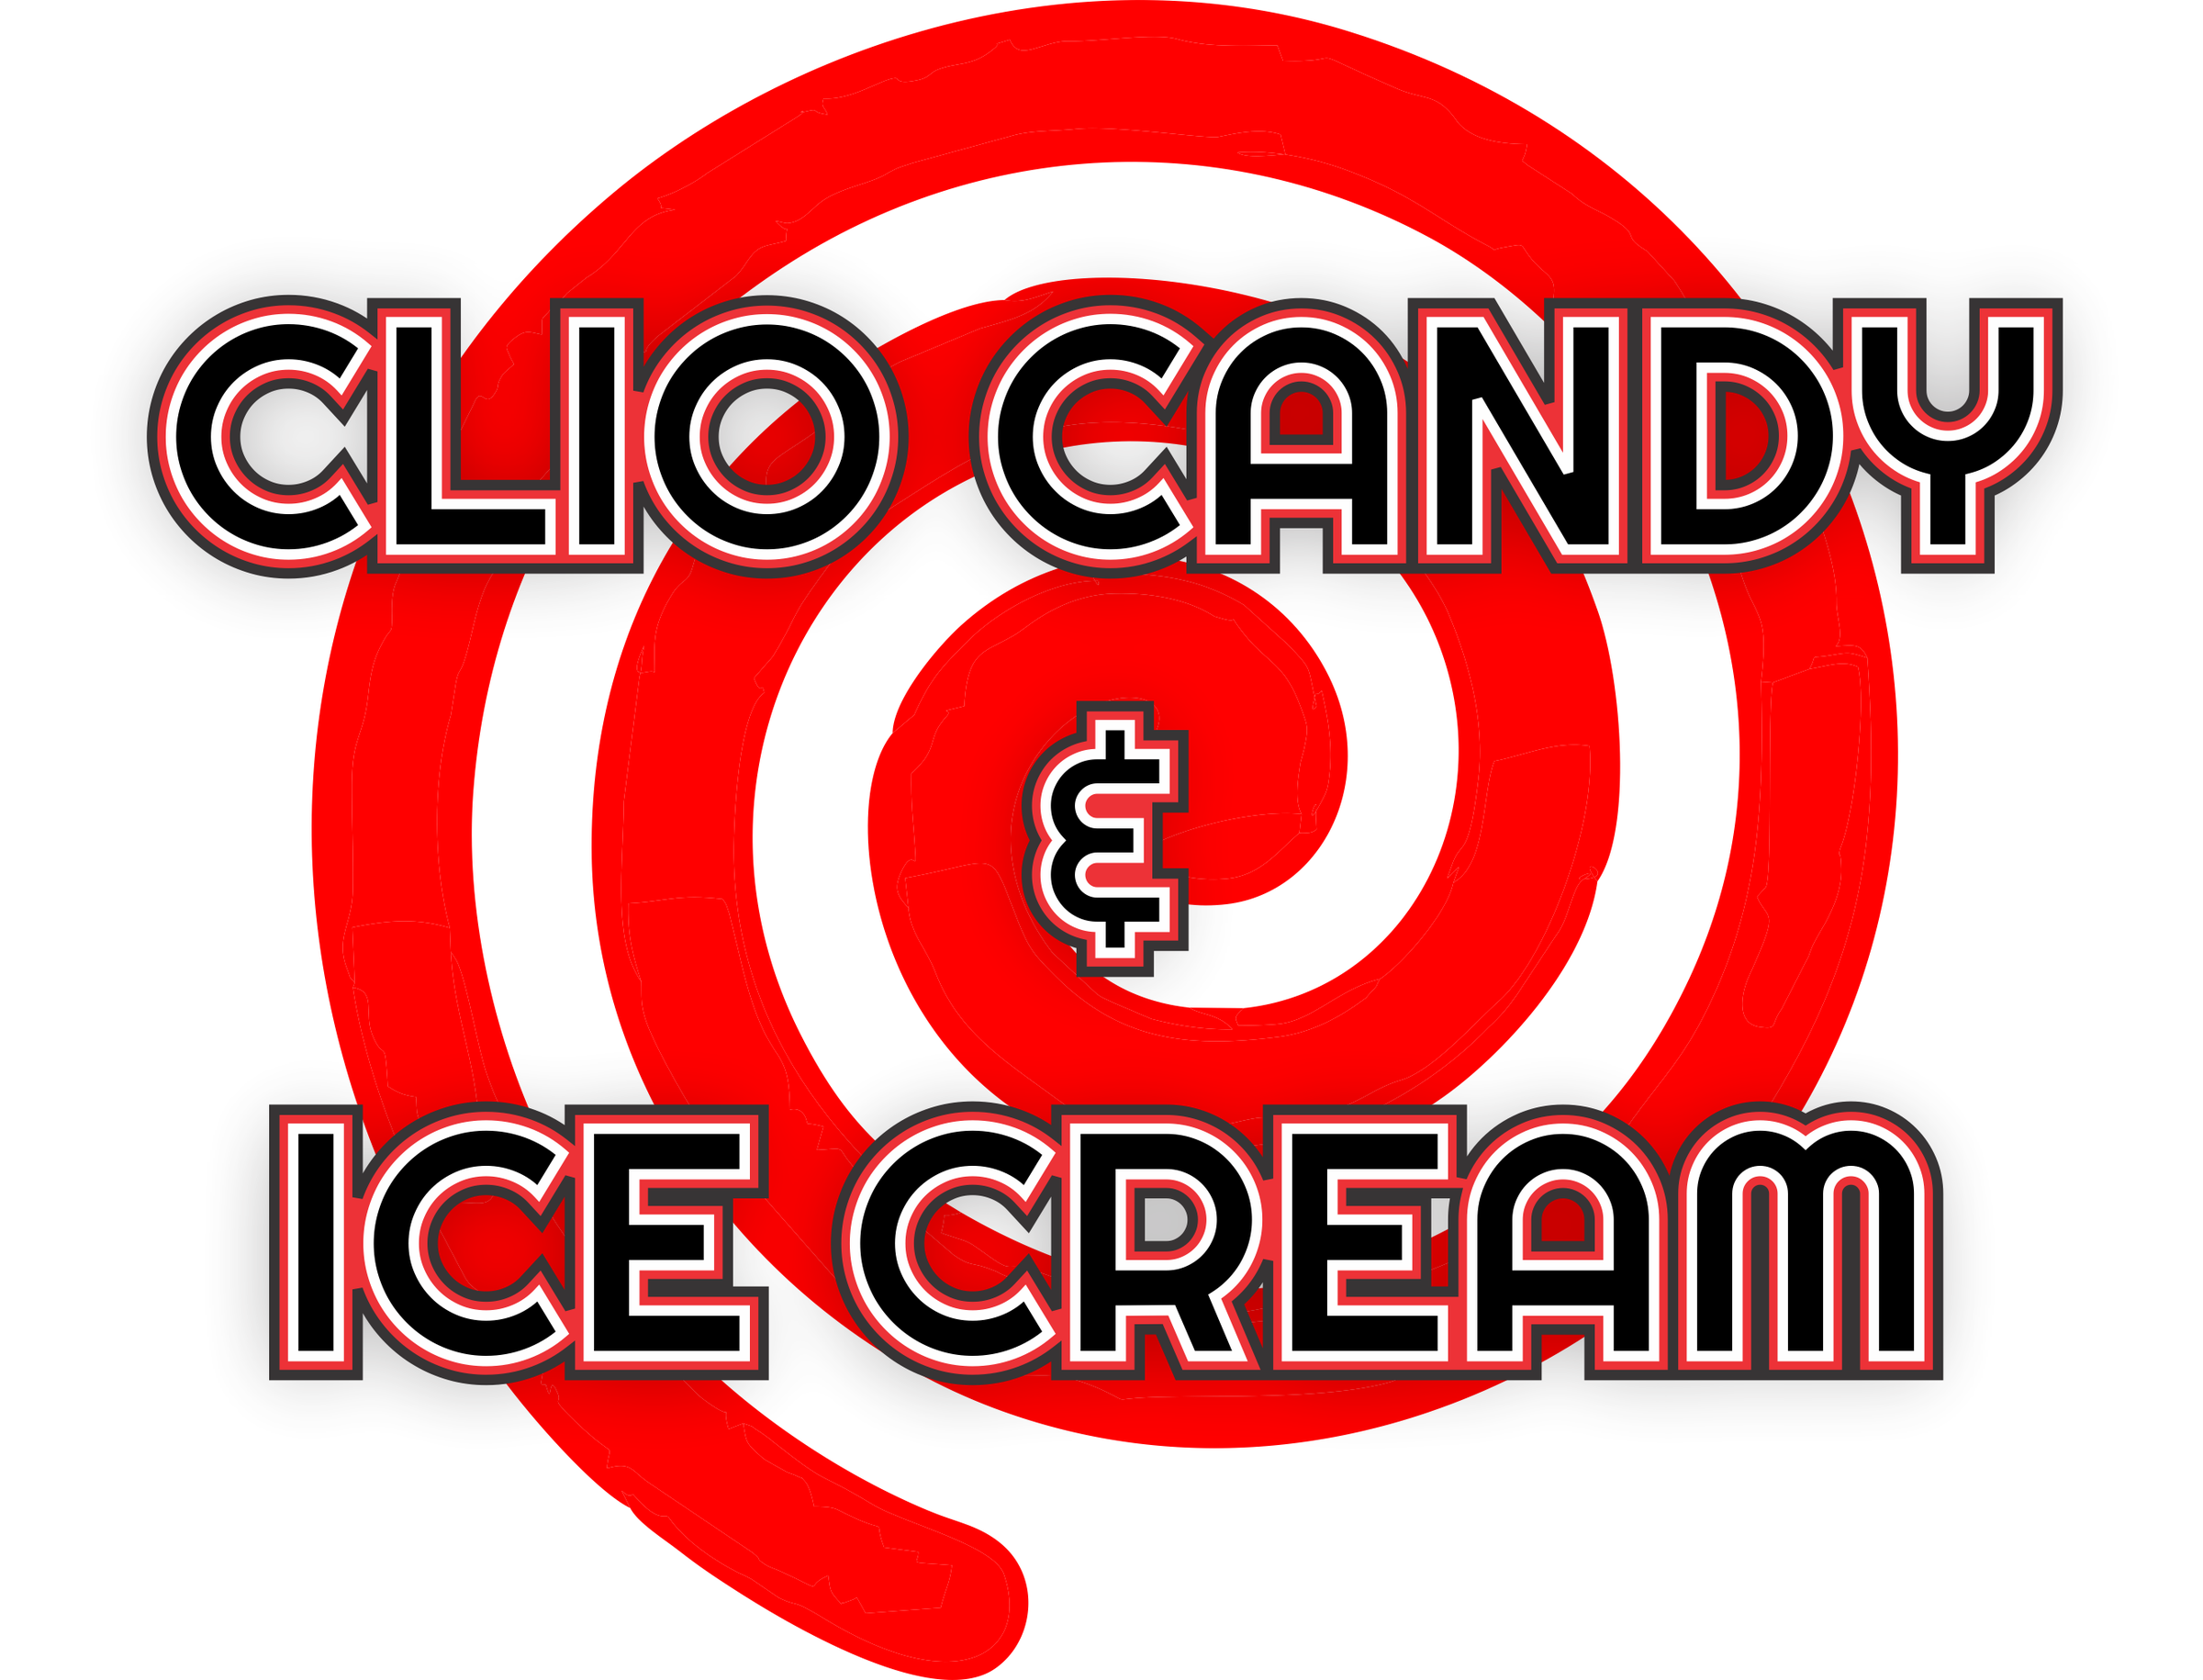 Clio Candy Company - We specialize in locating, and acquiring your